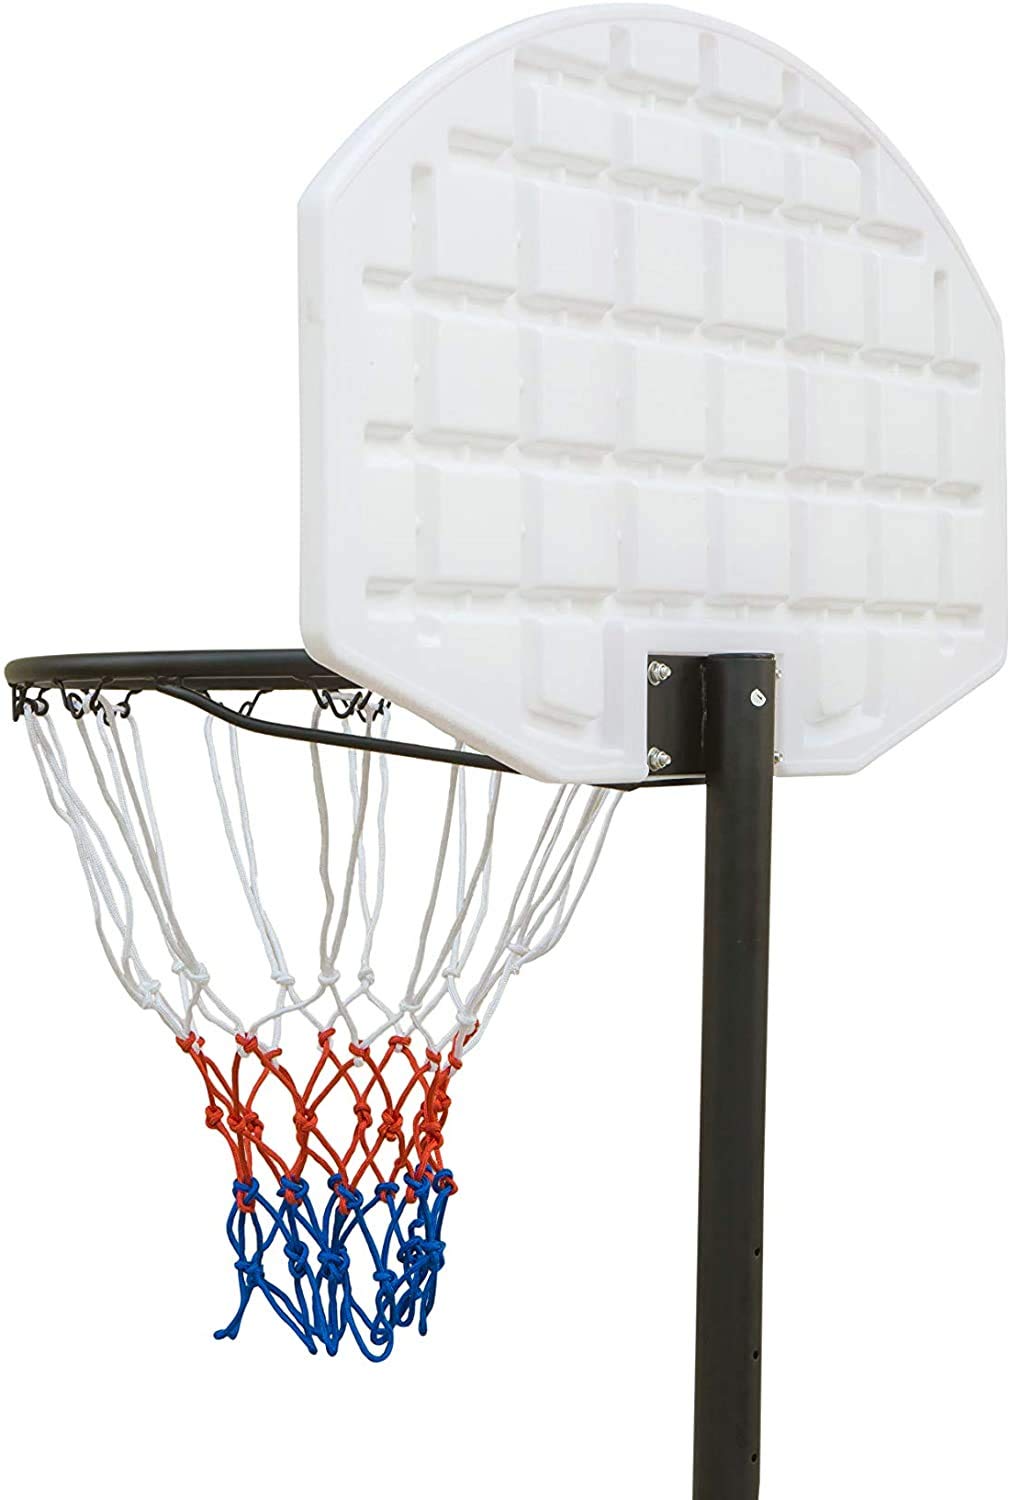 Basketball Hoop for Kids Portable Height-Adjustable [6.5FT - 8 FT] Sports Backboard System Stand w/Wheels